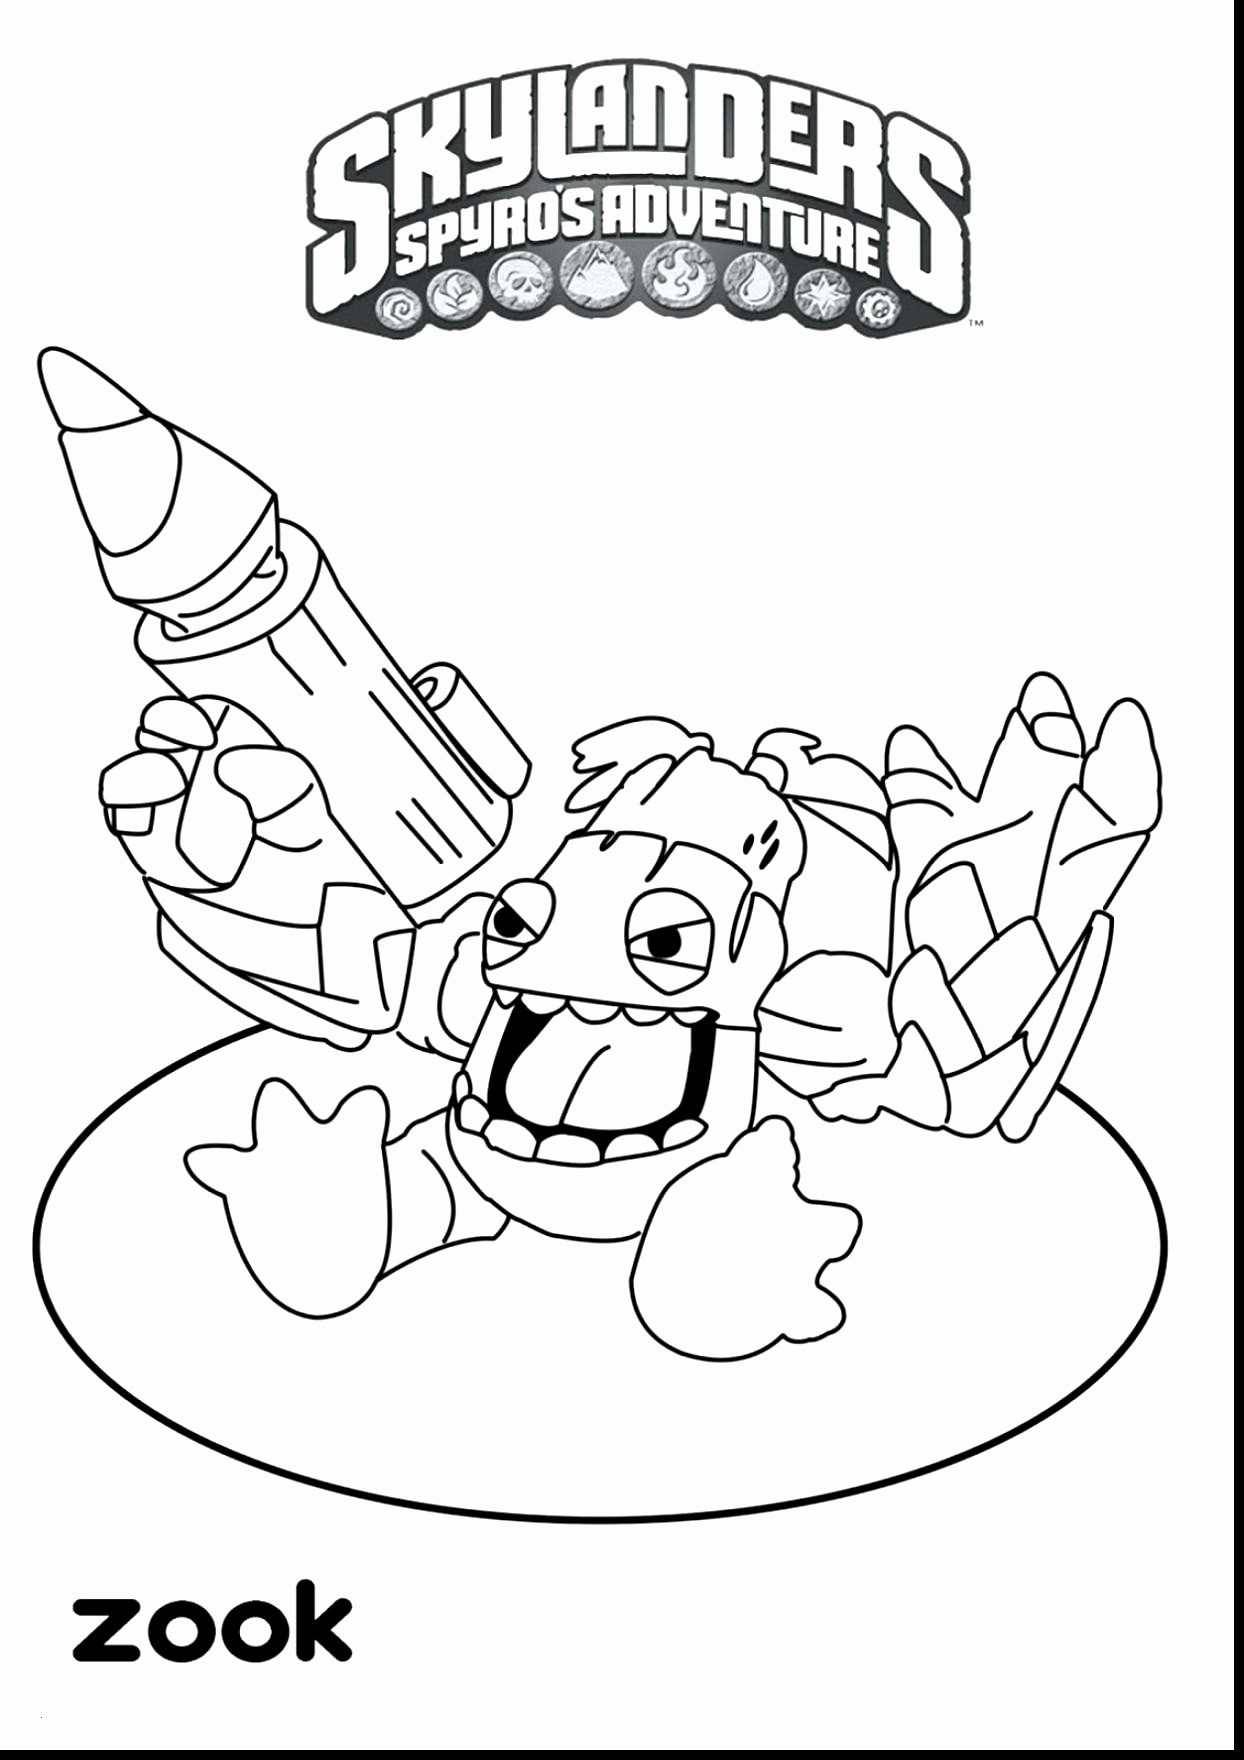 Coloring Pages Princess Beautiful Princess Coloring Sheets Elegant Cool Coloring Page Unique Witch